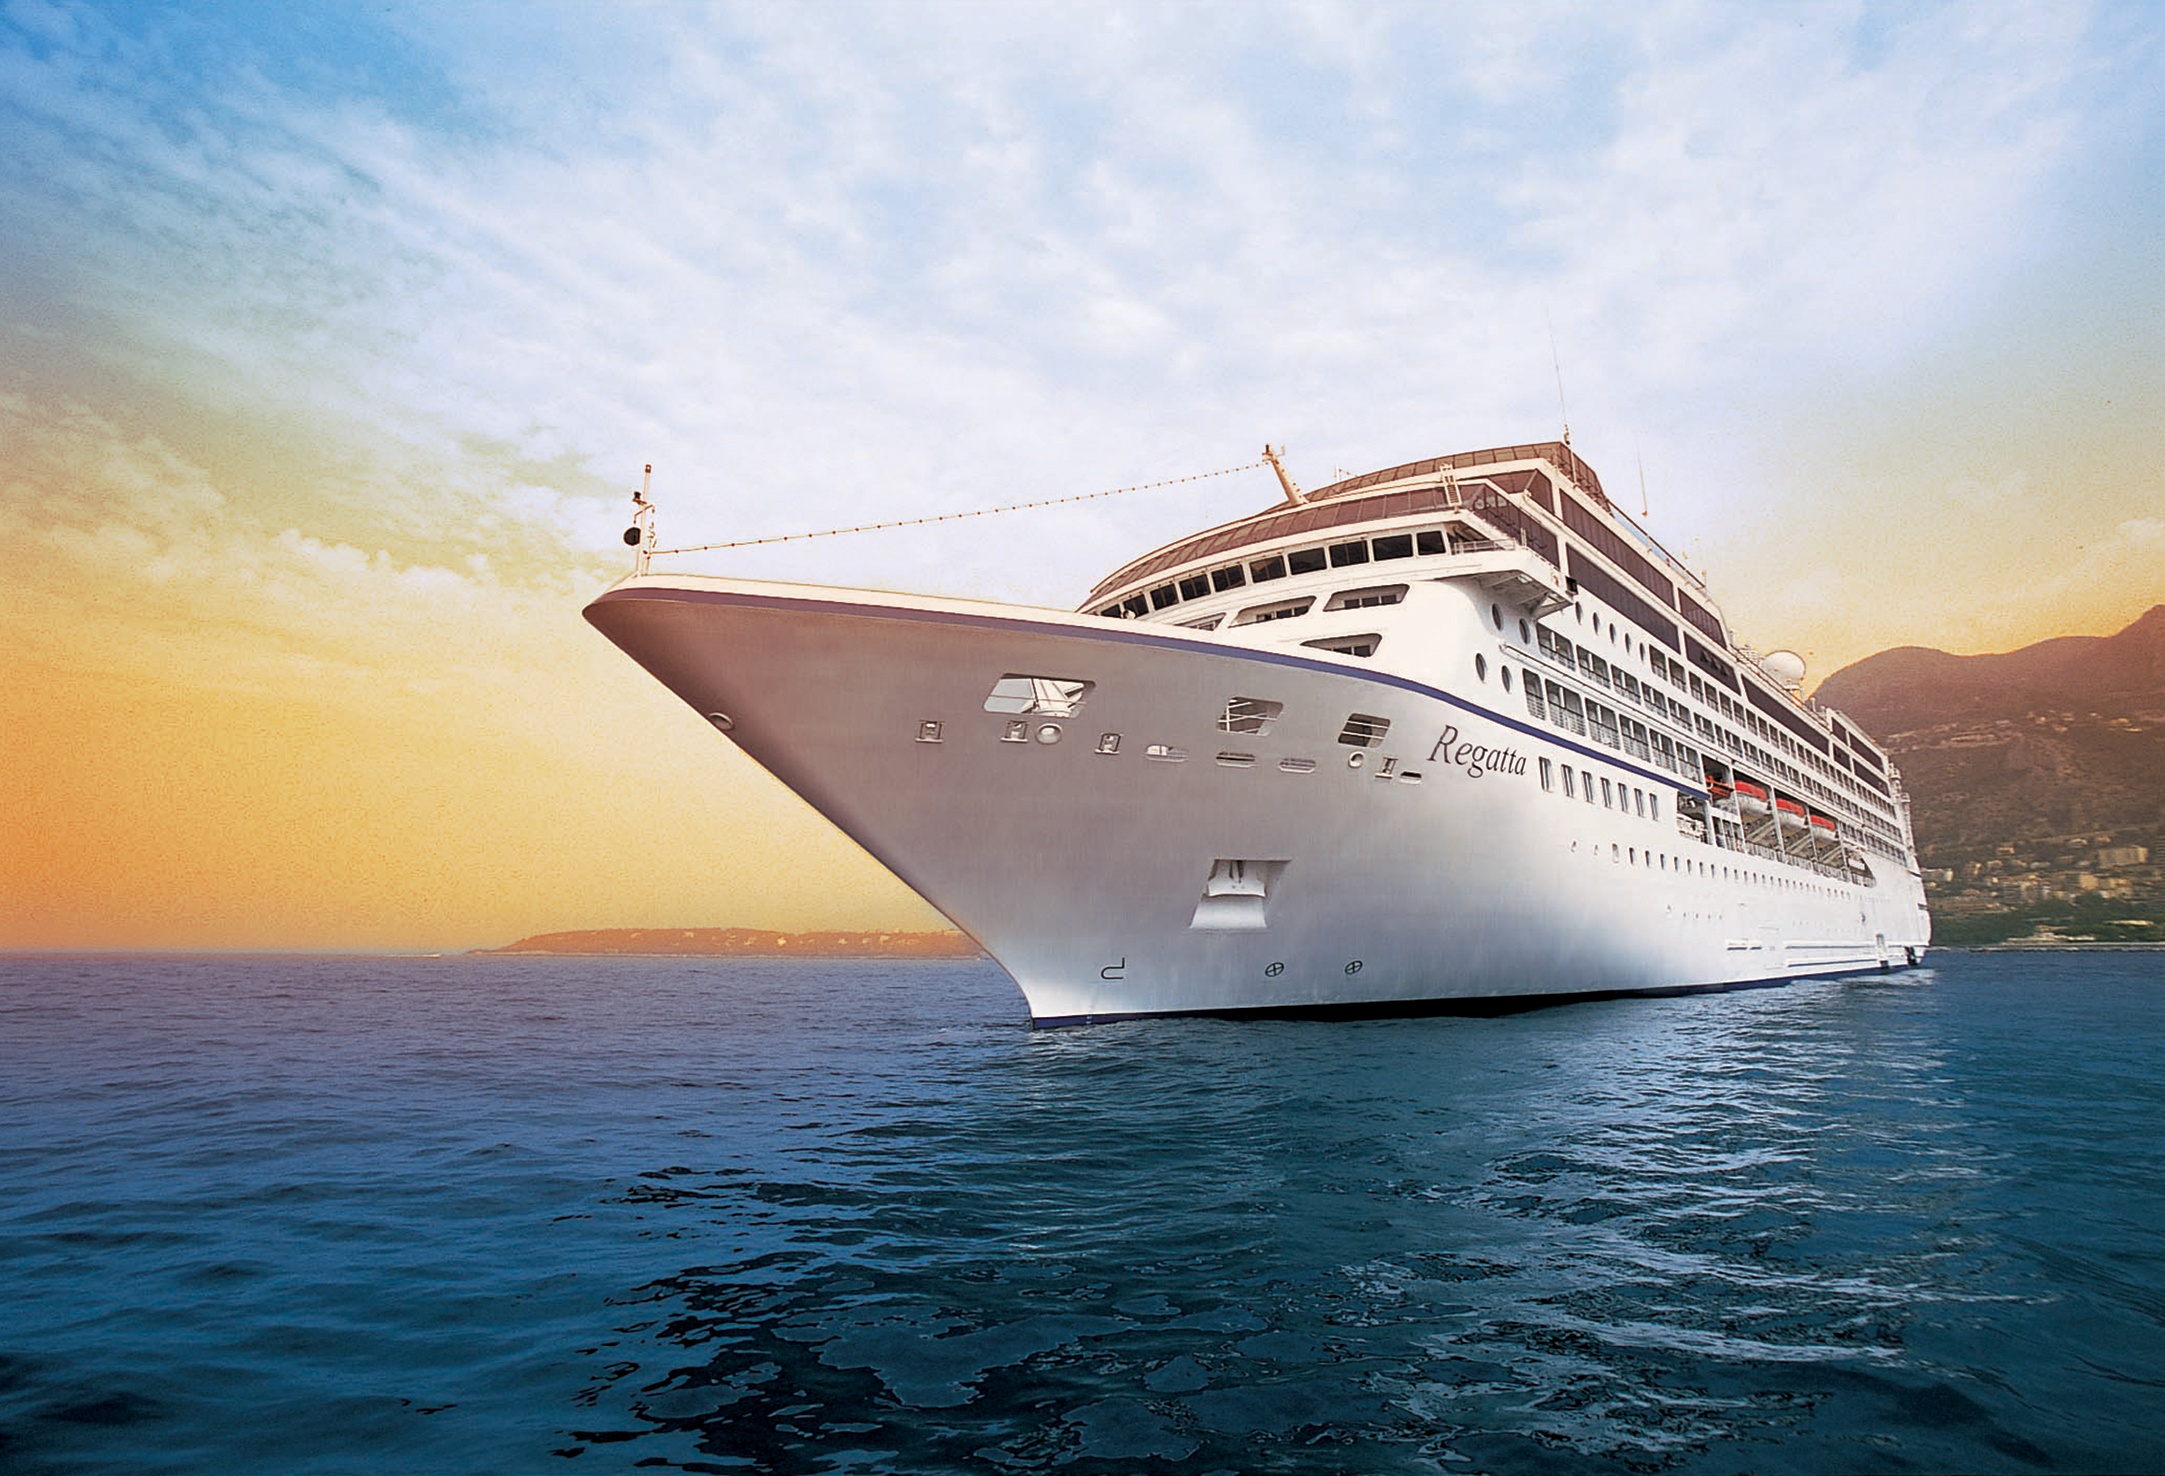 oceania cruise lines phone number